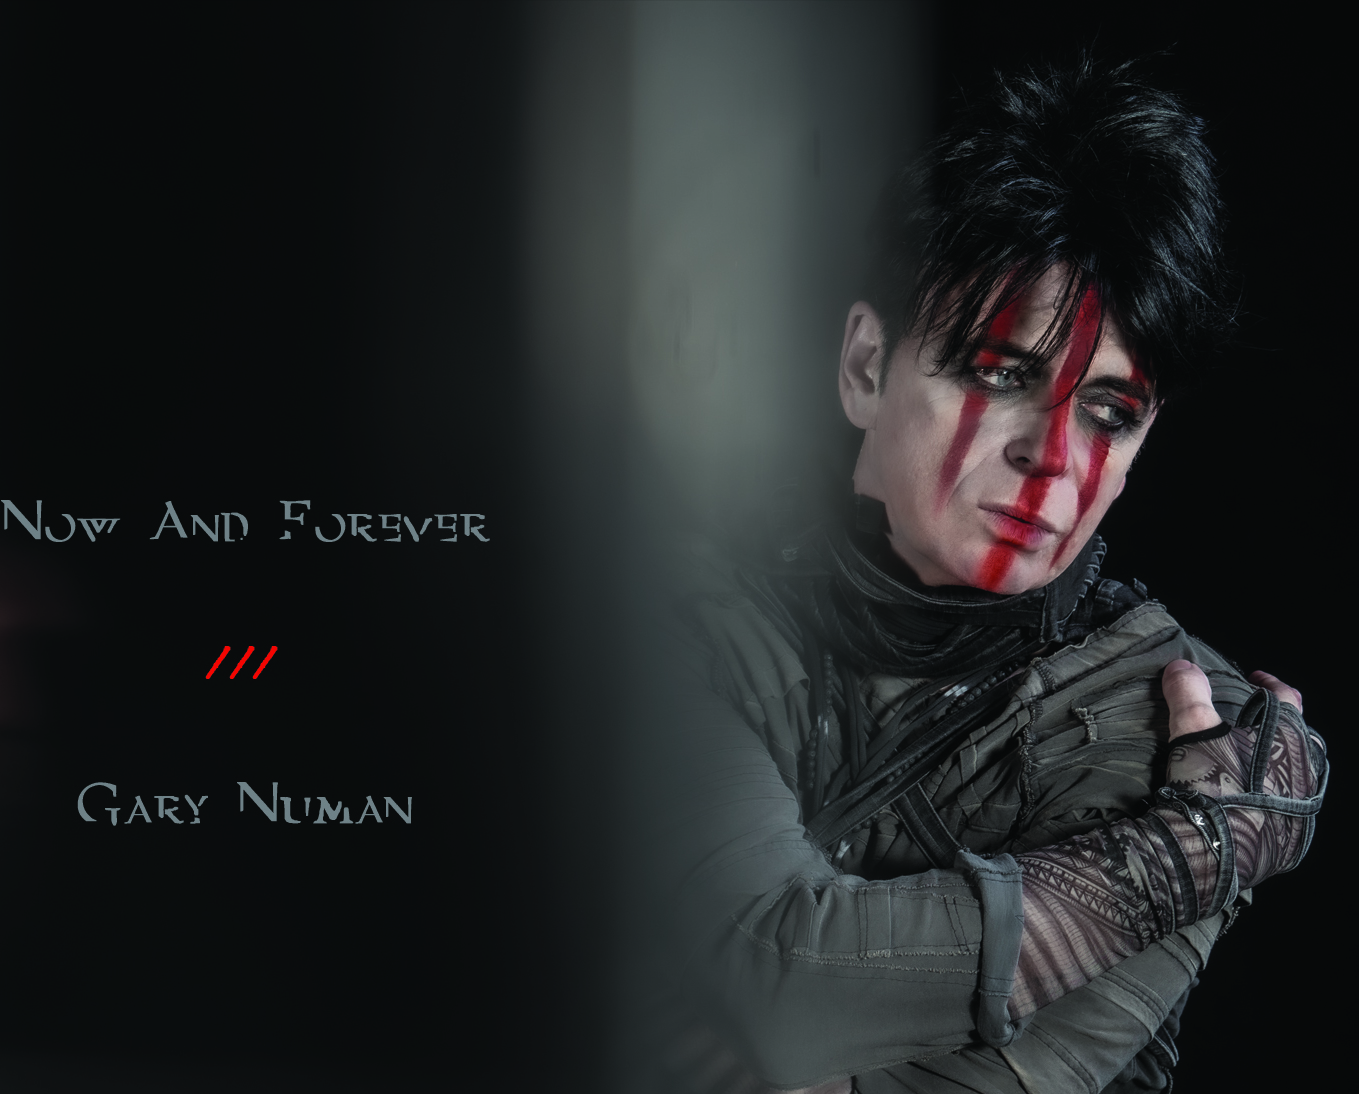 GARY NUMAN shares new single 'Now And Forever' ahead of album next month 